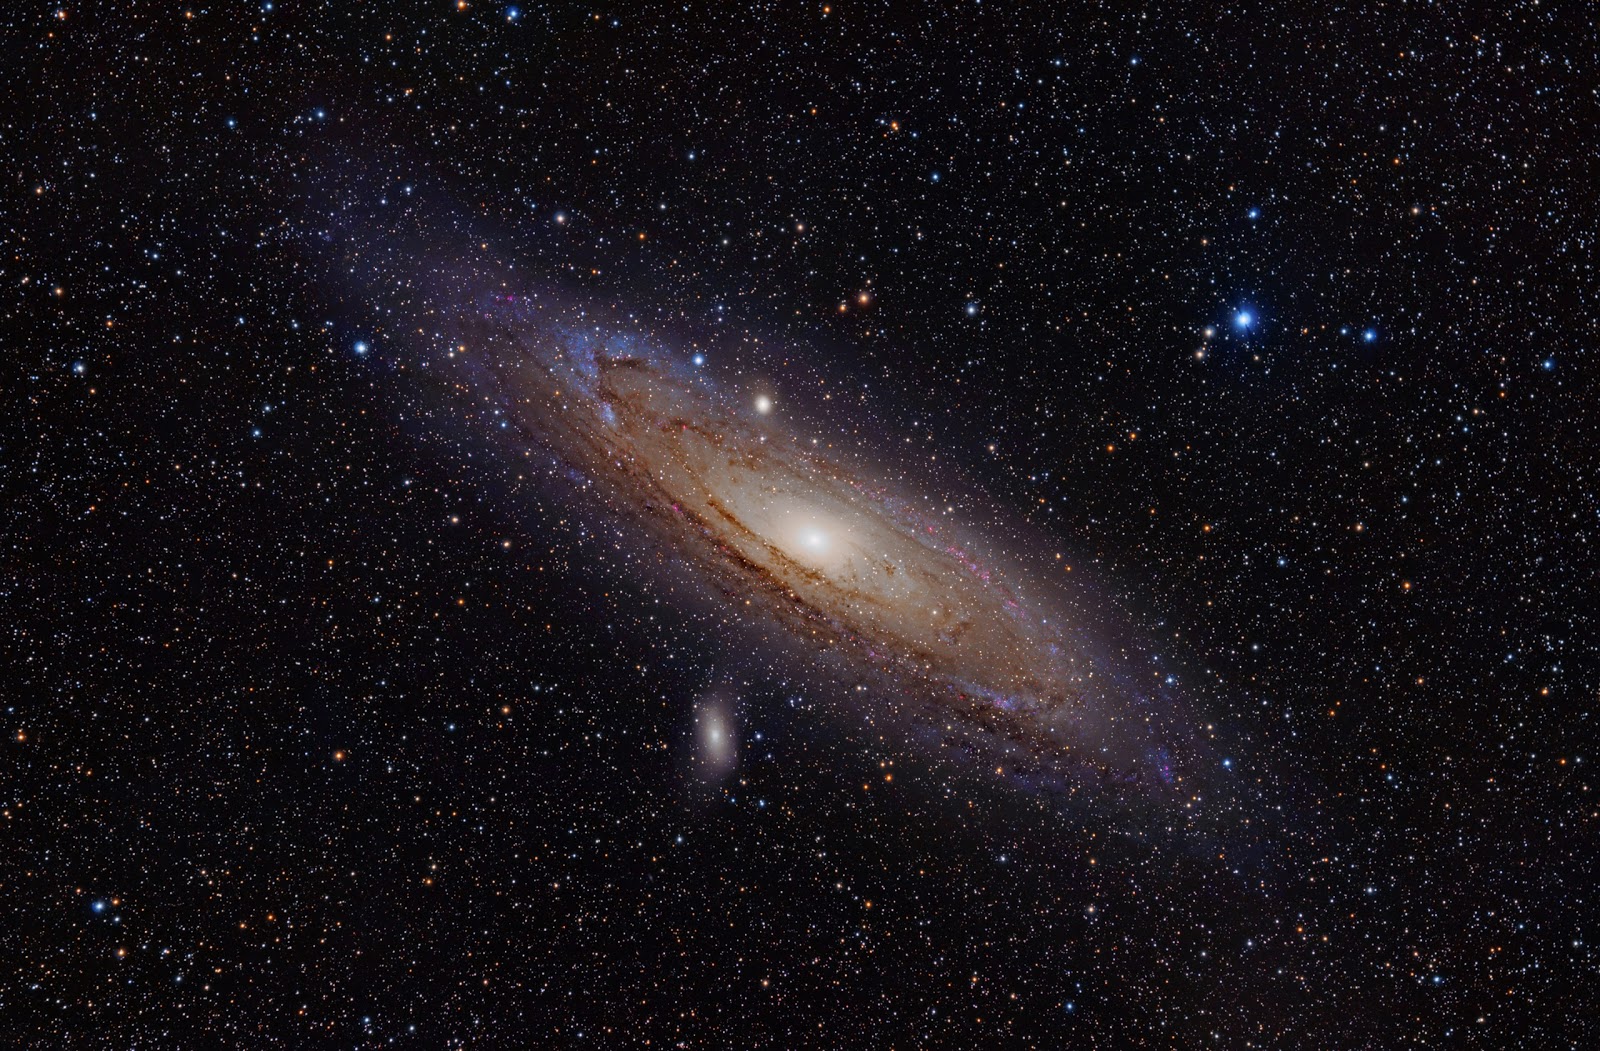 Andromeda Galaxy Wallpaper Hd - Hq Pictures Of Space - HD Wallpaper 